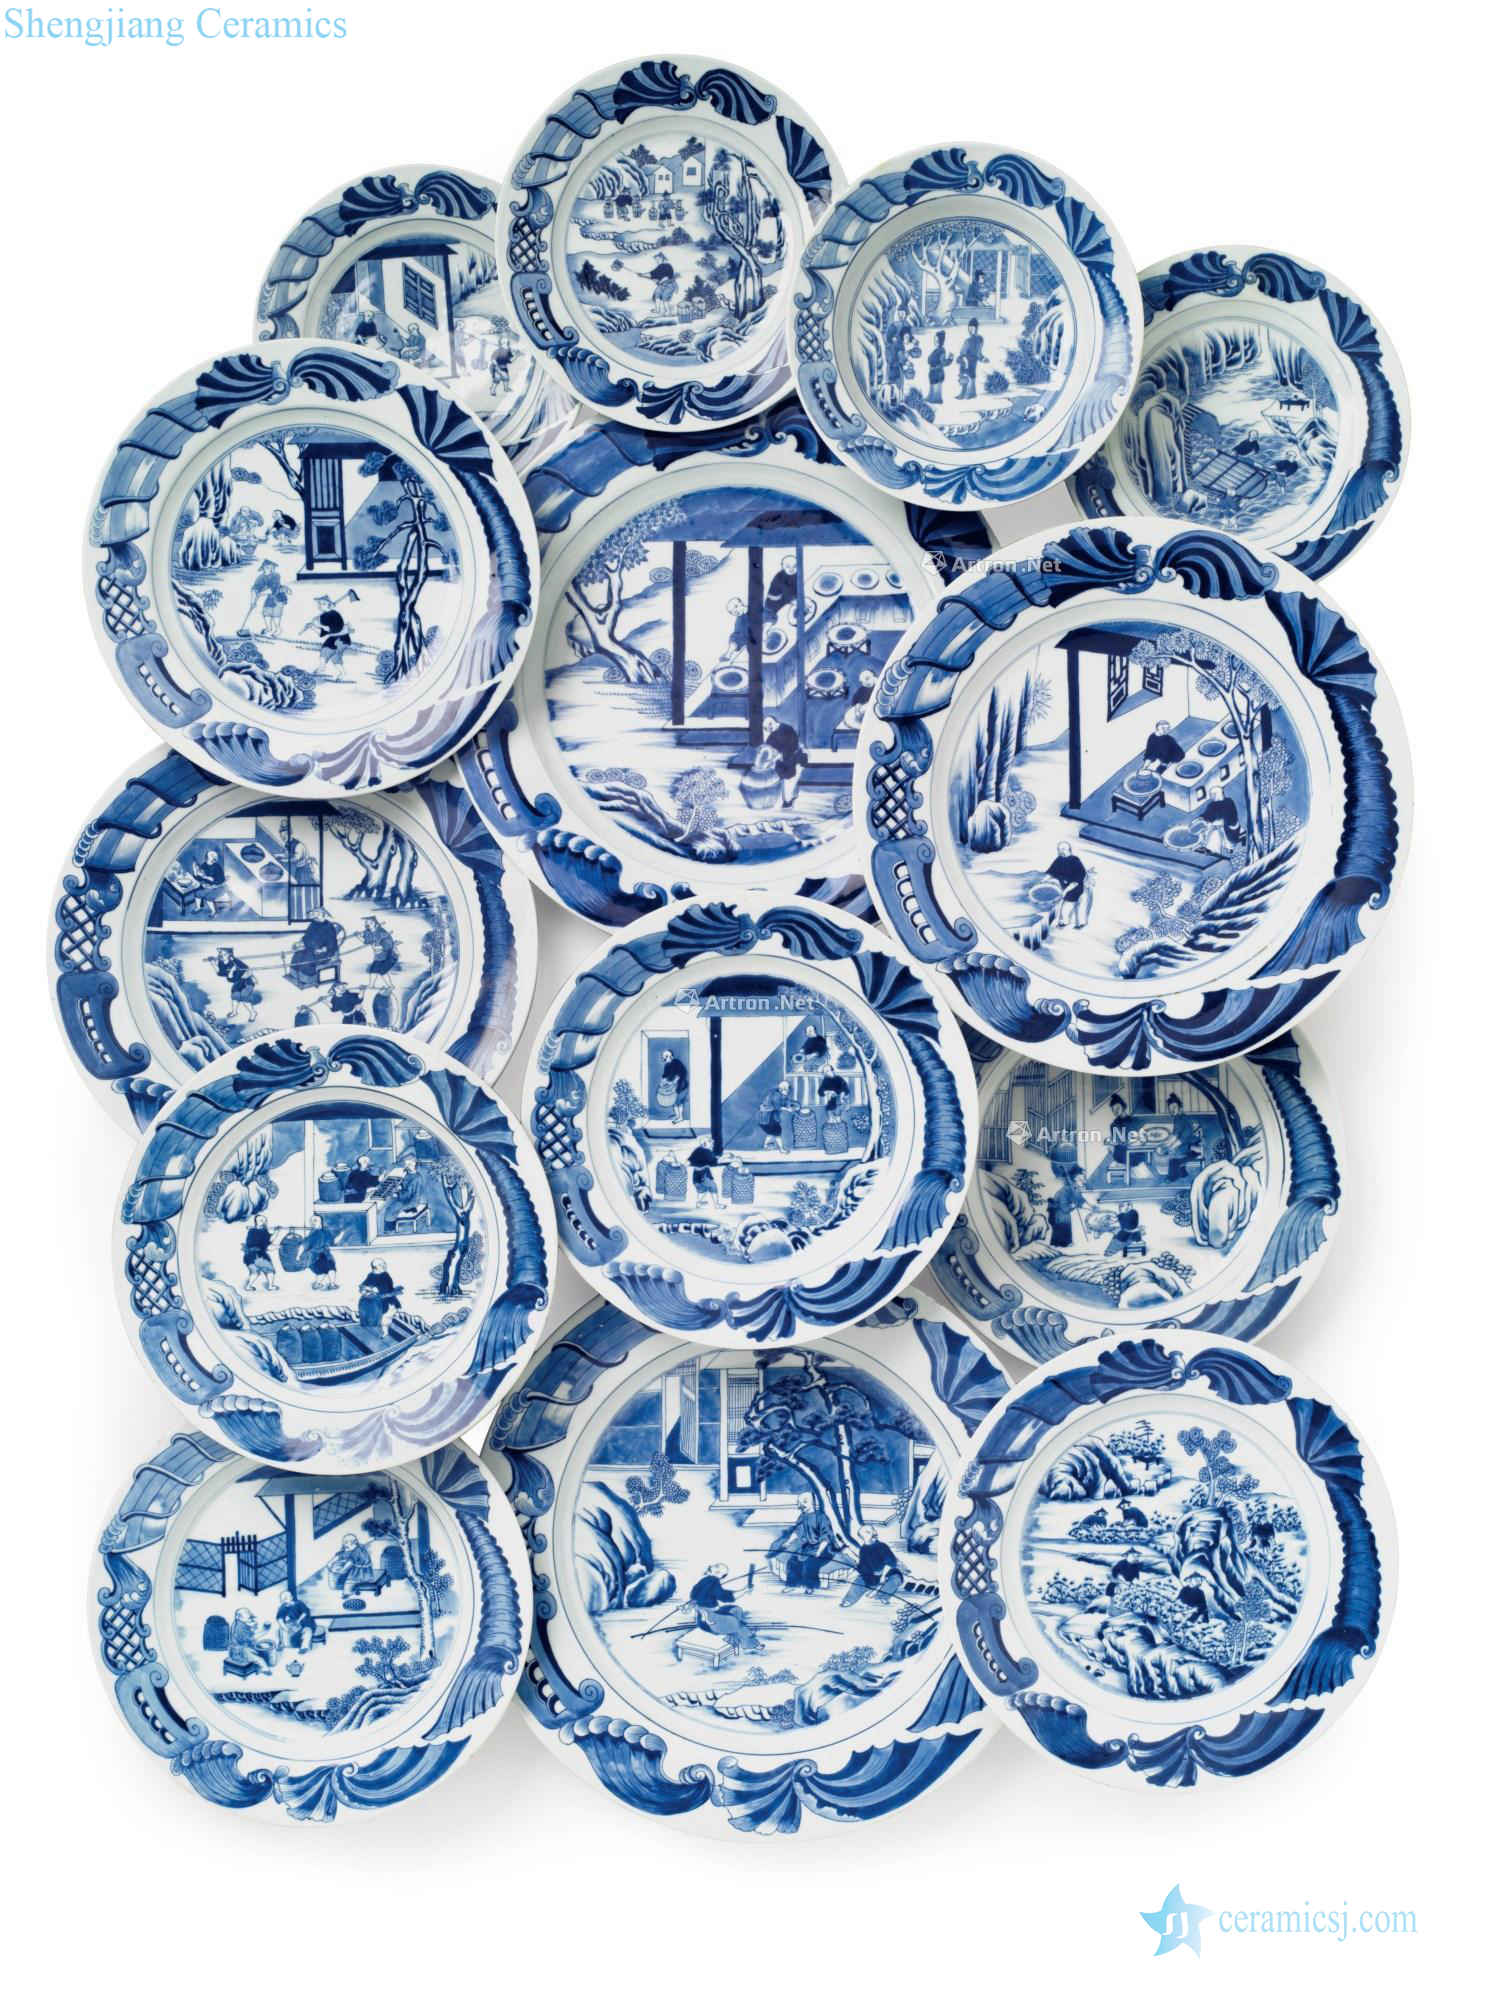 Qianlong period, about 1750, A VERY RARE SET OF BLUE AND WHITE 'TEA CULTIVATION' DISHES